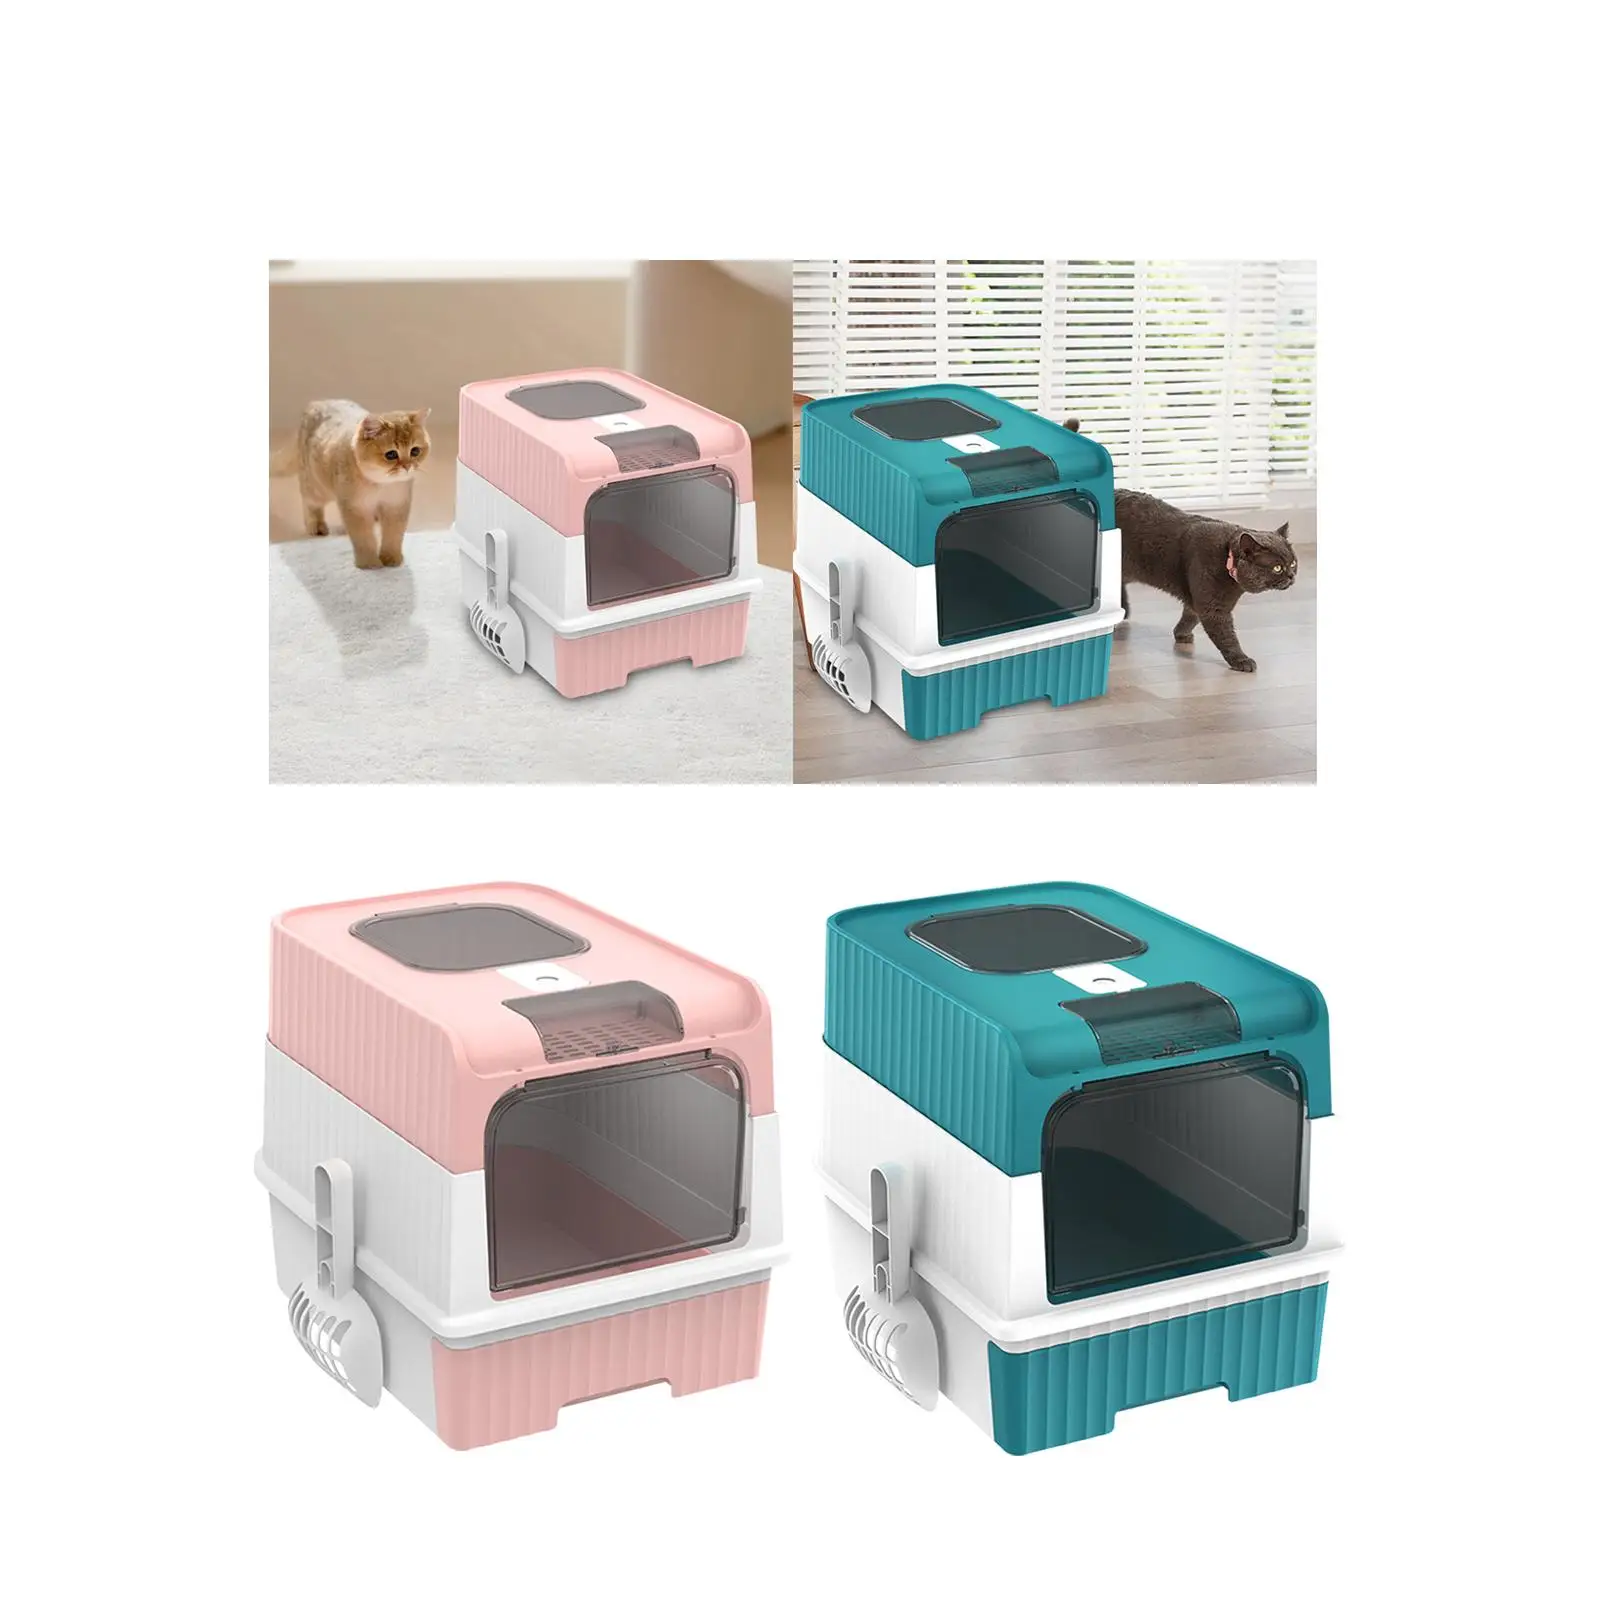 Hooded Cat Litter Boxes Detachable Pet Litter Tray Pet Supplies Cat Litter Tray for Small, Medium and Large Cat Pet Litter Boxes